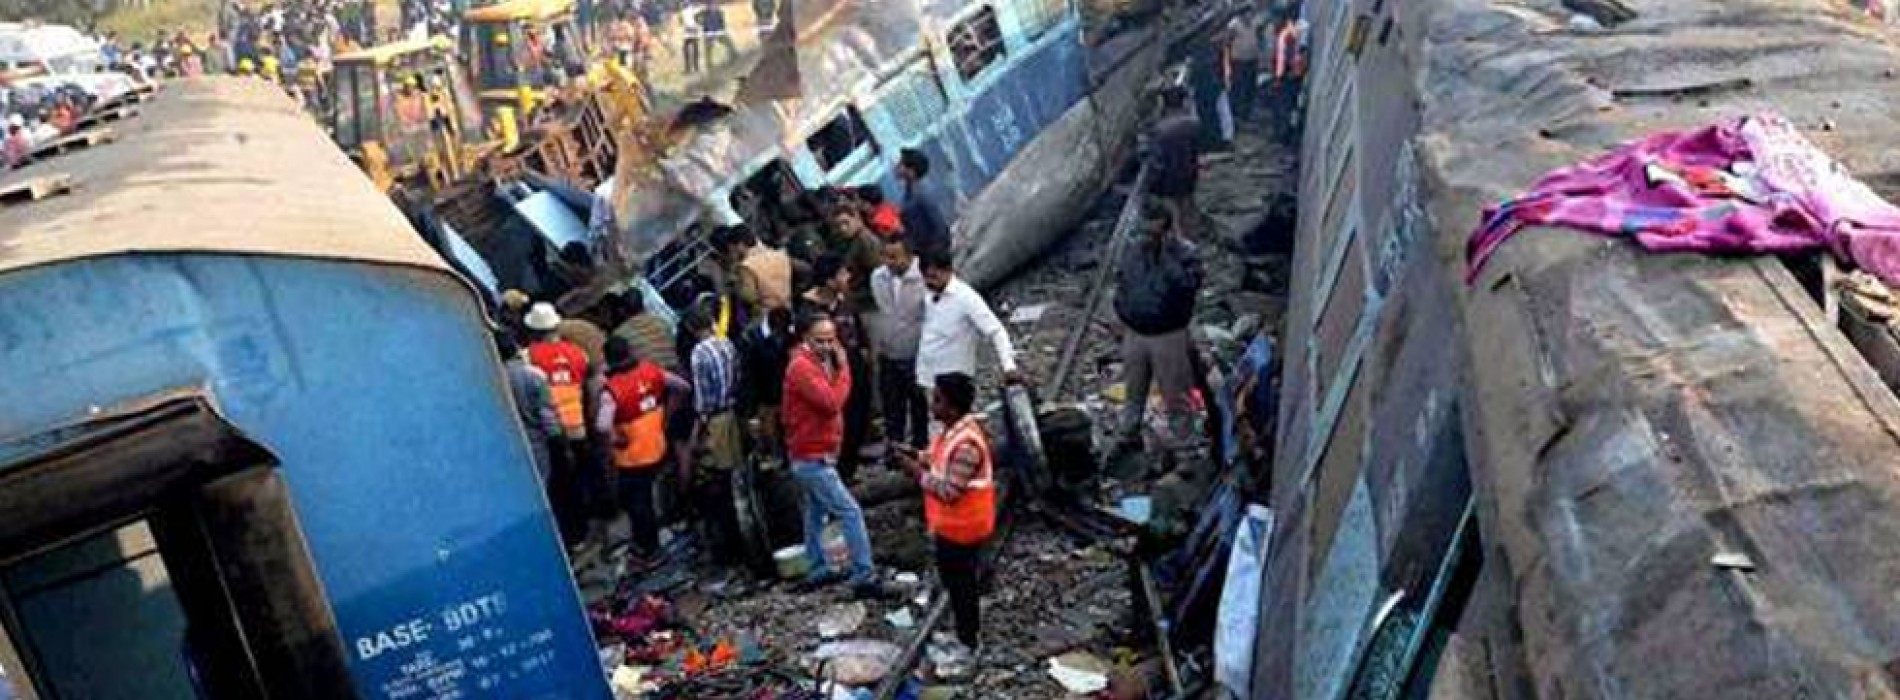 Pakistan’s link unearthed in Kanpur train accident that killed more than 140 passengers, 3 arrested